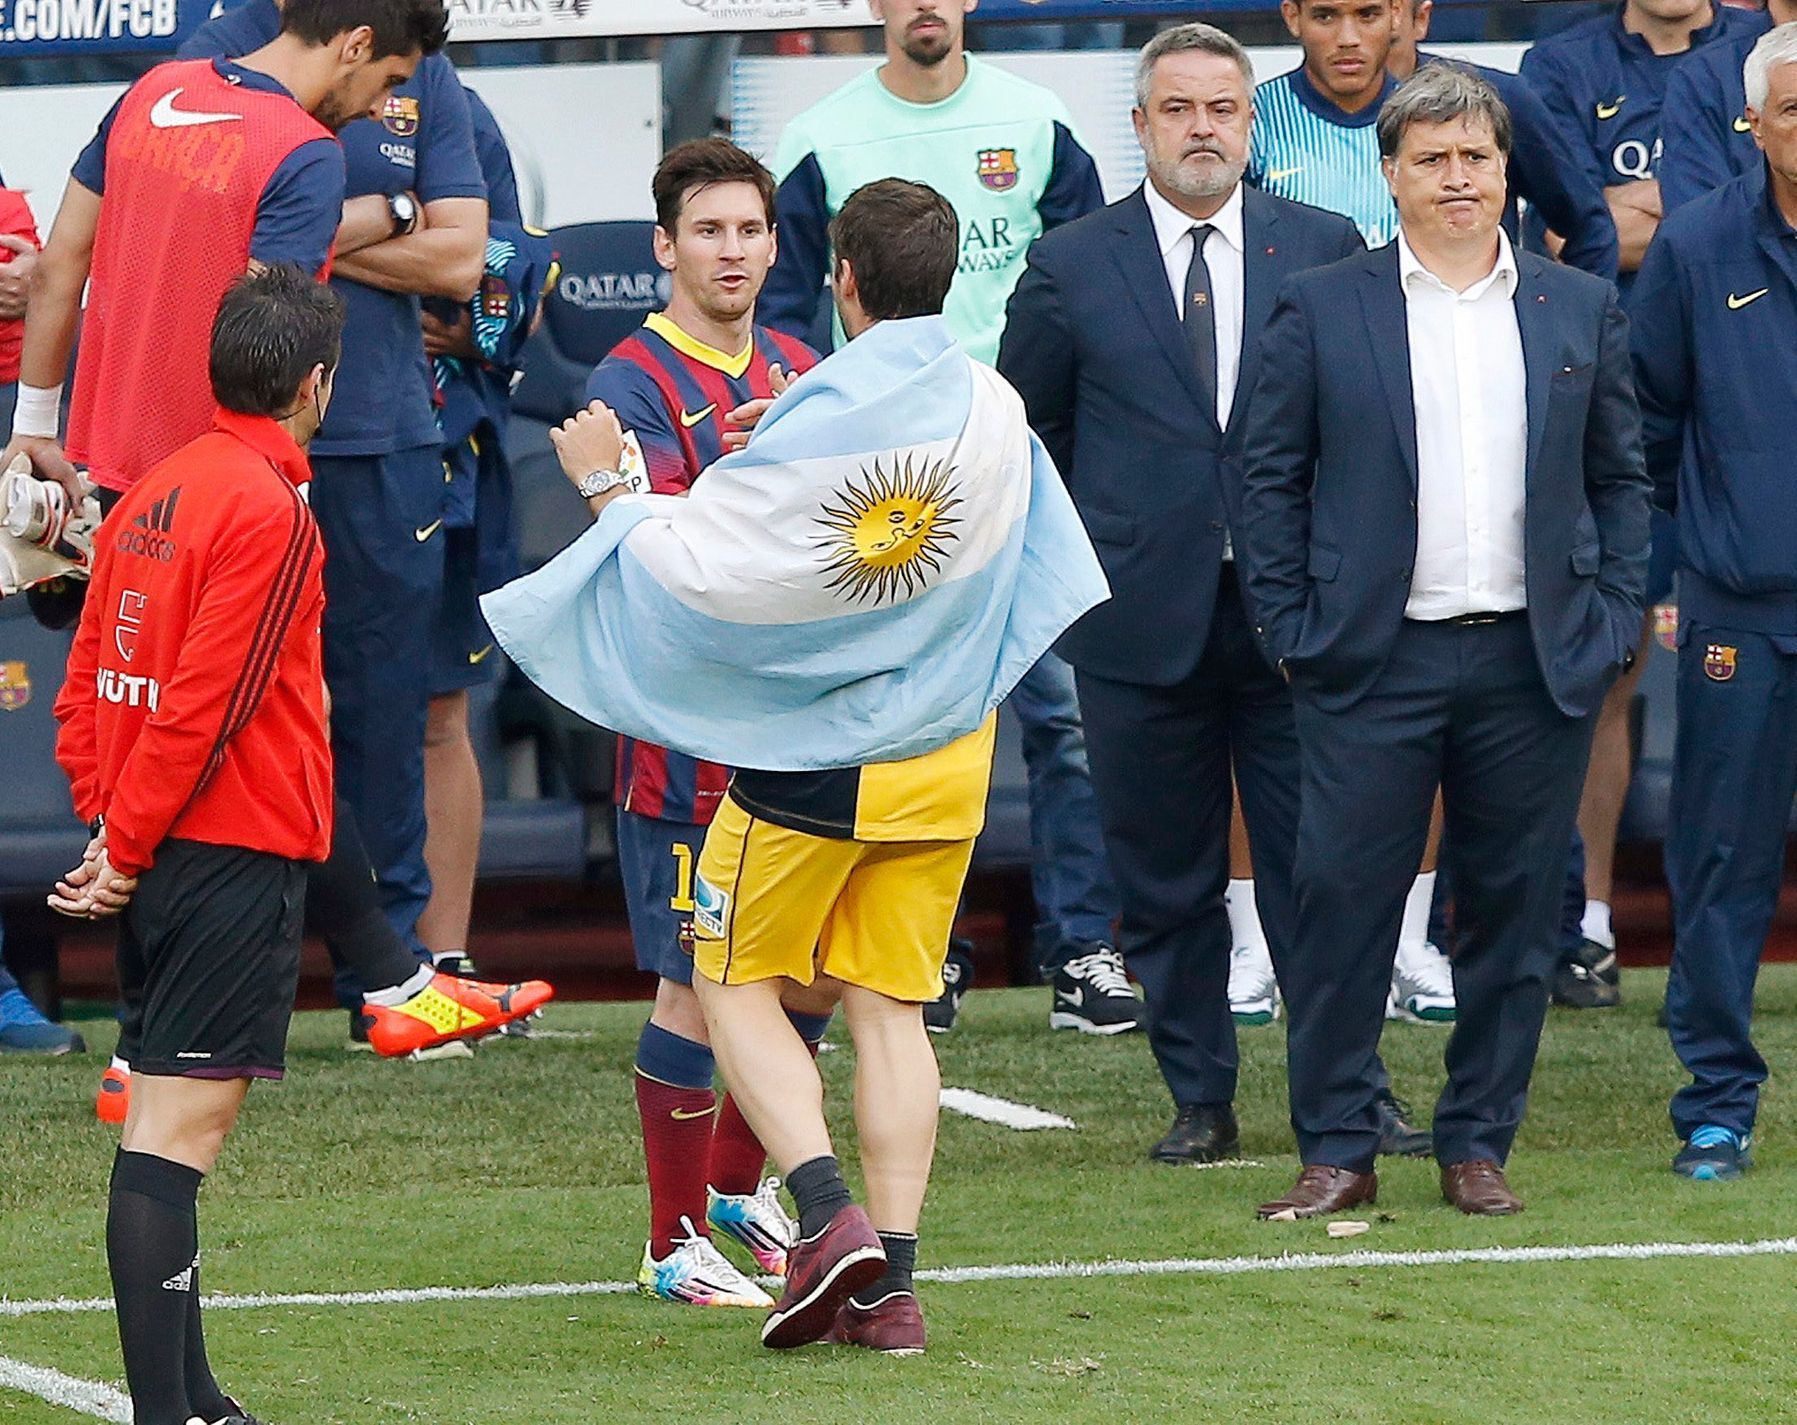 Atletico Madrid's Insua, with Argentine national flag draped over his shoulders, speaks to his compatriot Barcelona's Messi, as coach Martino stands nearby after Atletico Madrid won their Spanish firs